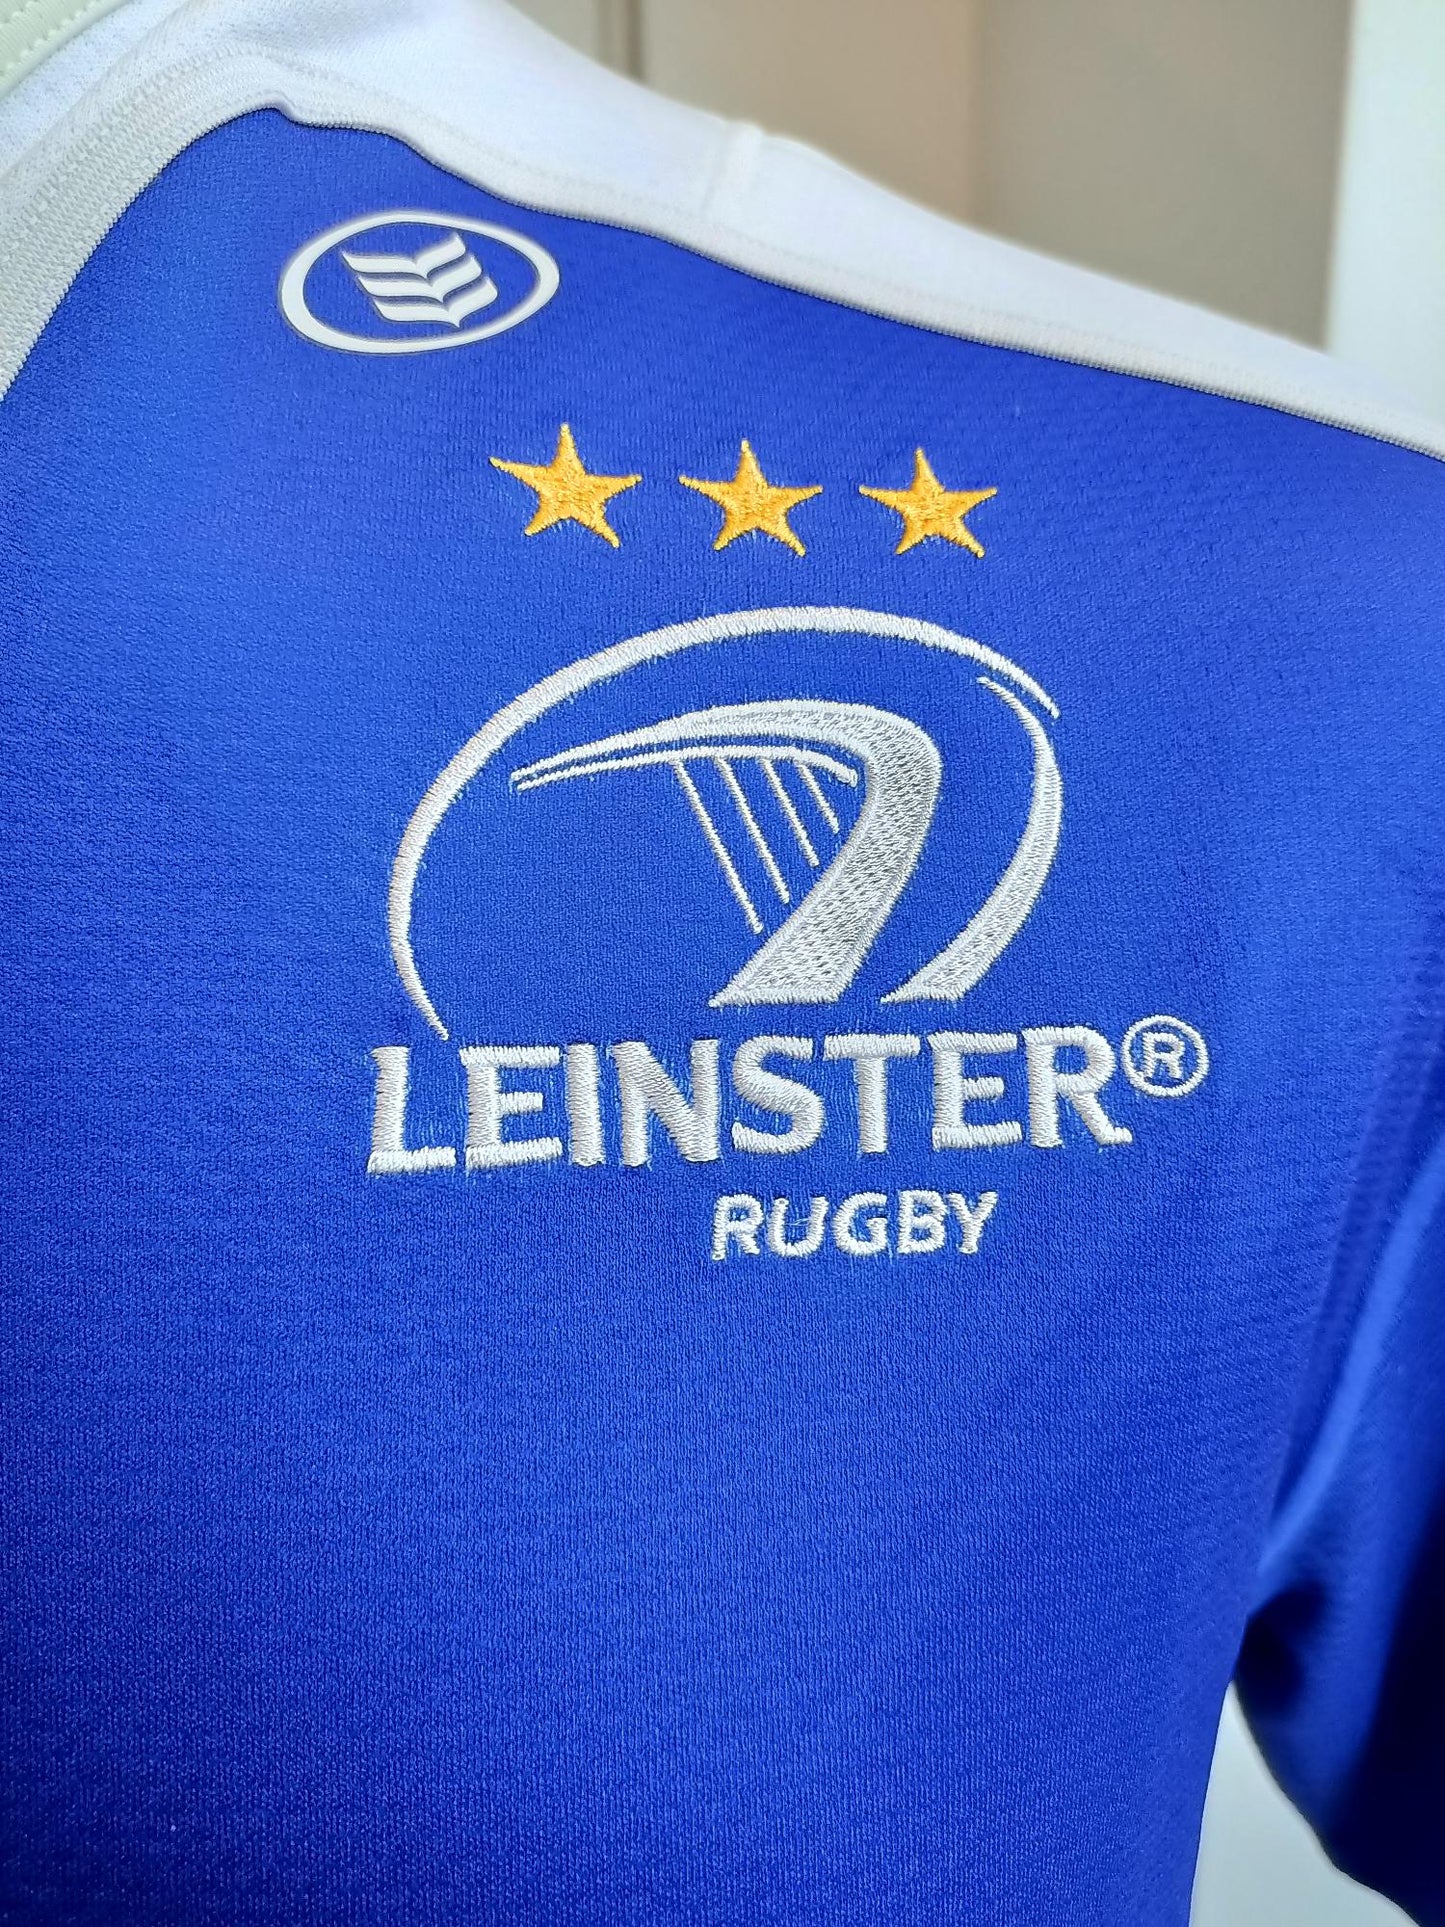 Leinster Rugby Union Shirt 2015/2016